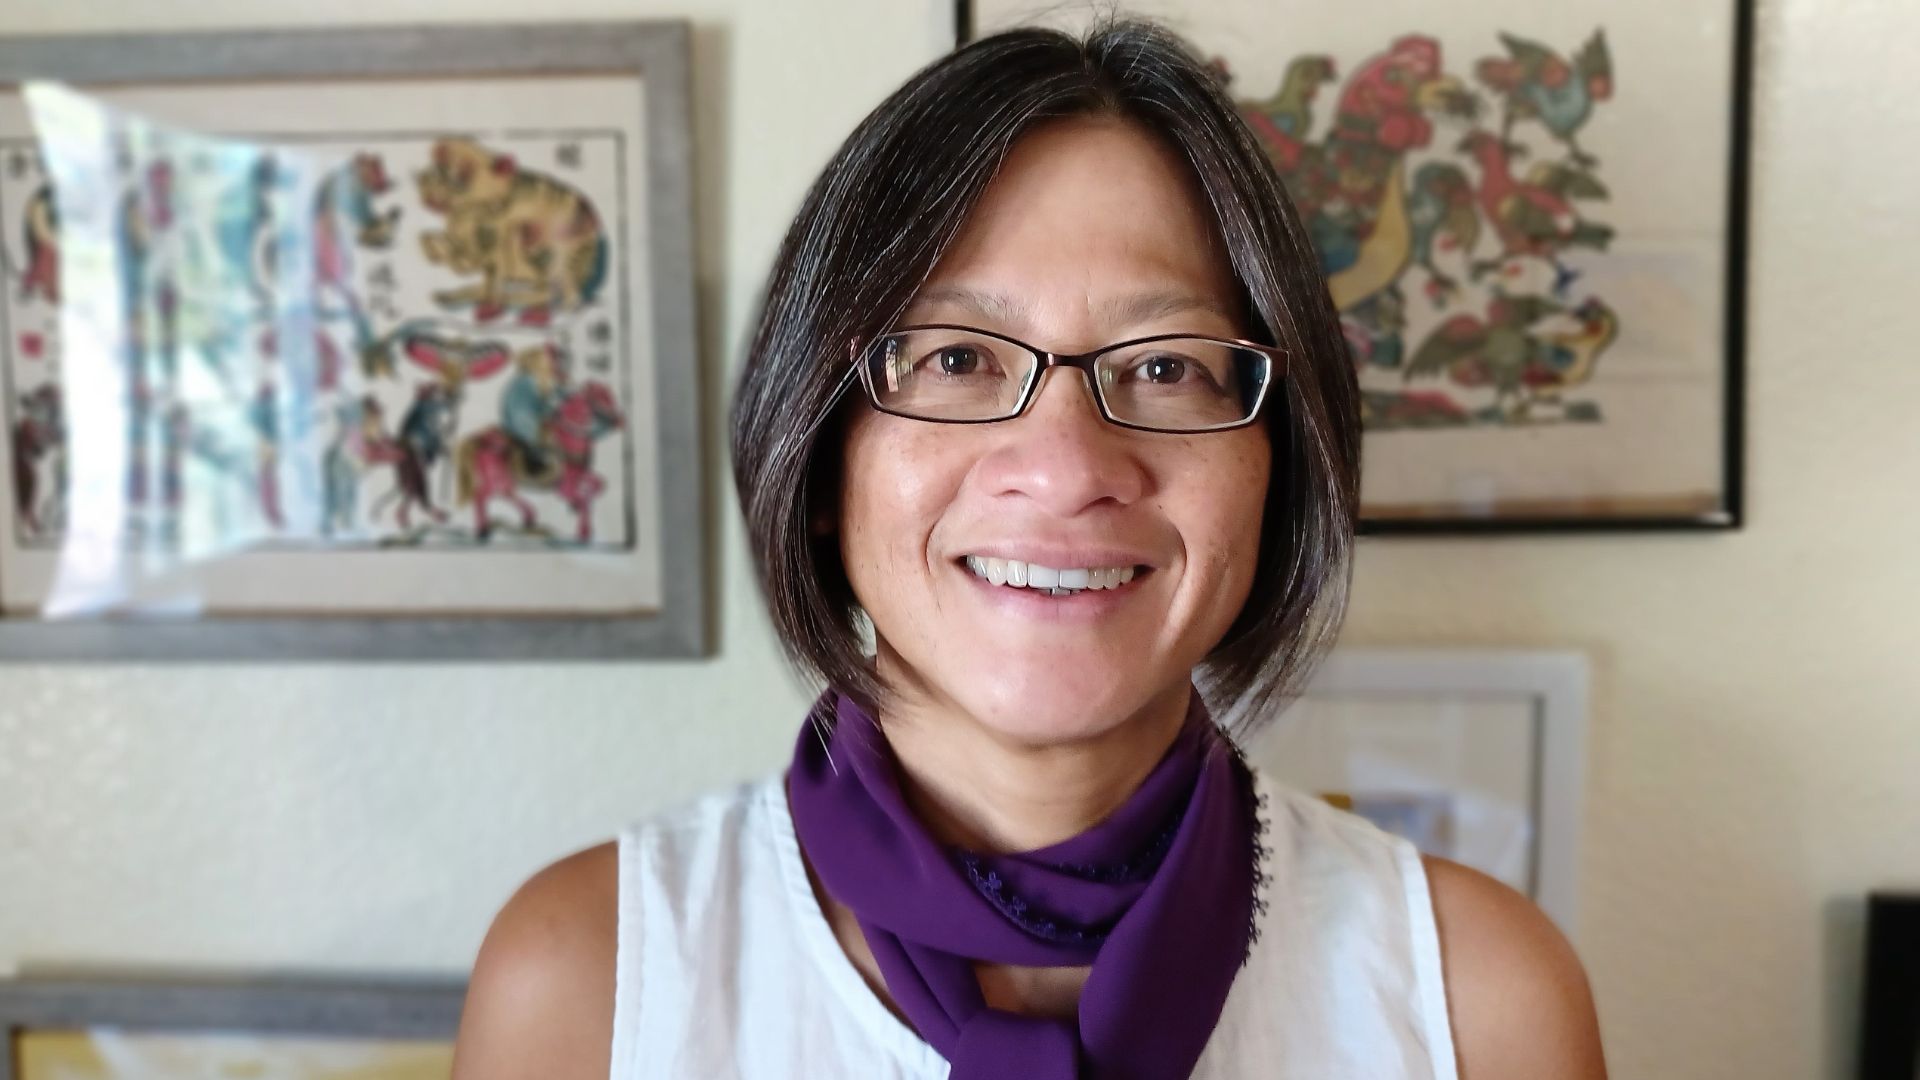 Angie Tran is a CSUMB professor and an immigrant from Vietnam